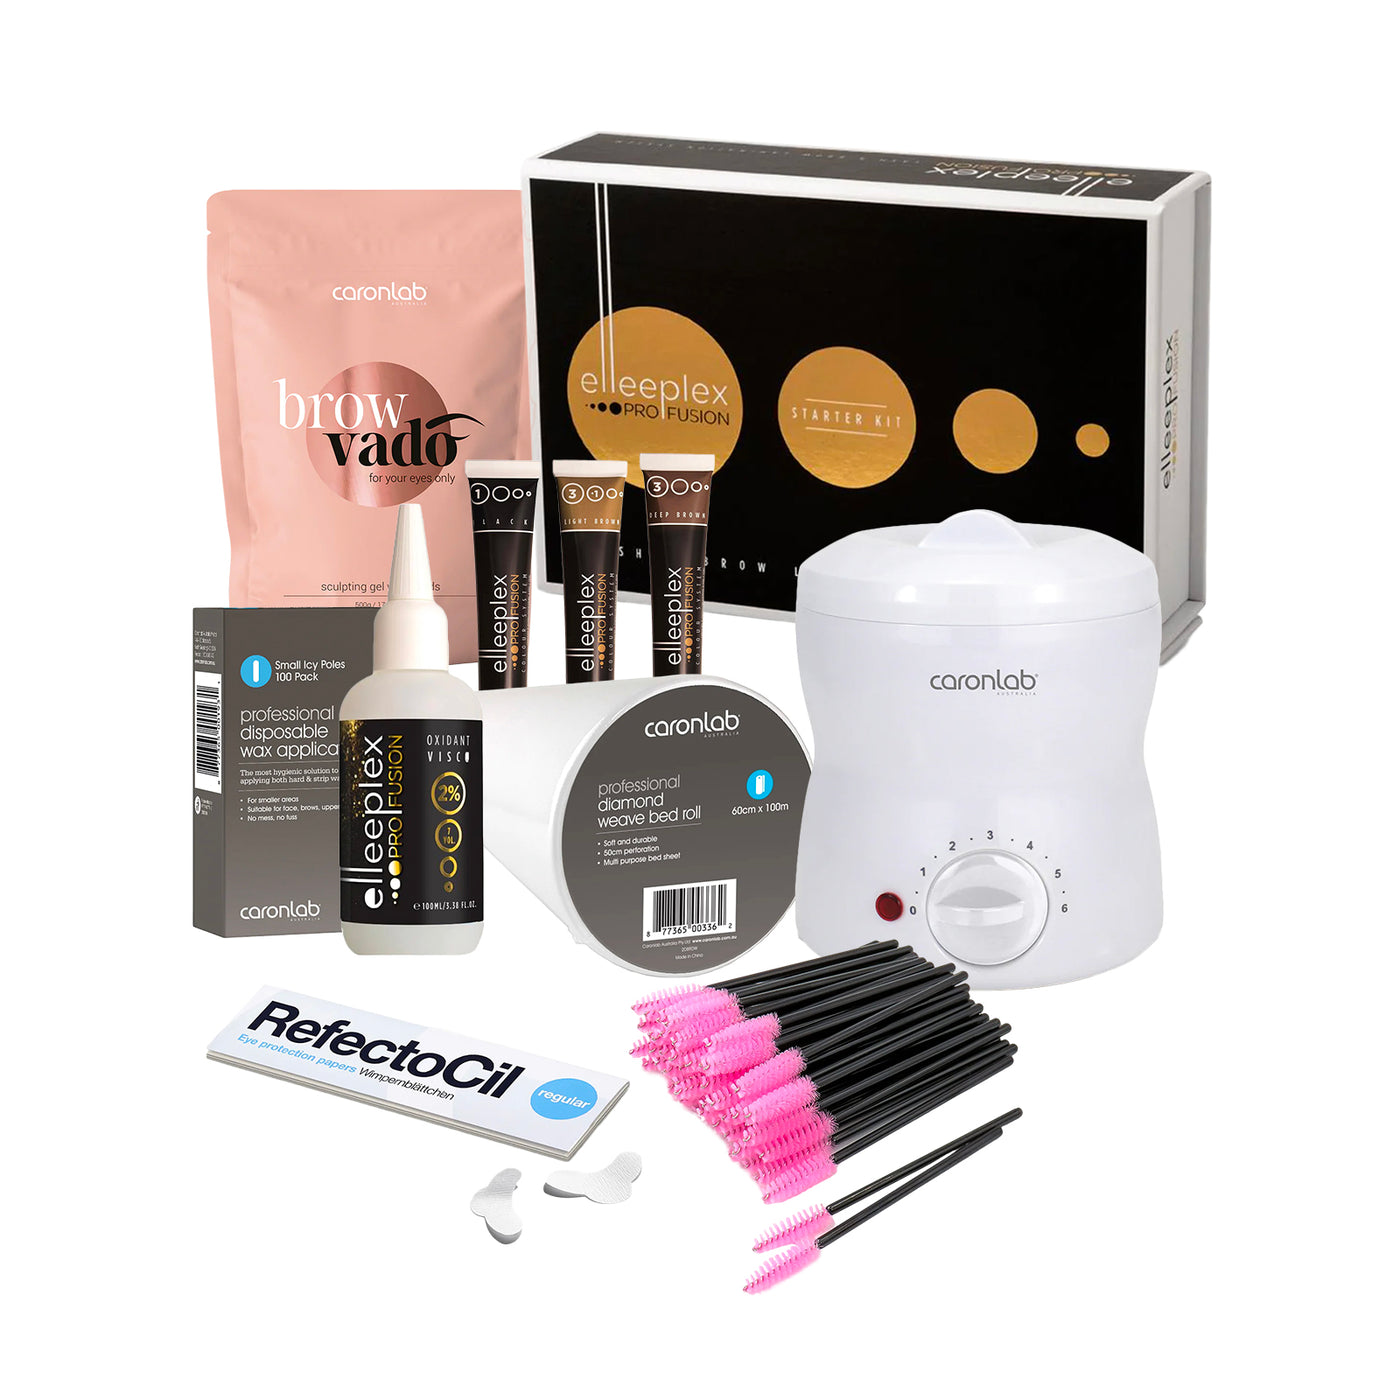 All Essentials Kit - For Tint, Lamination & Facial Wax